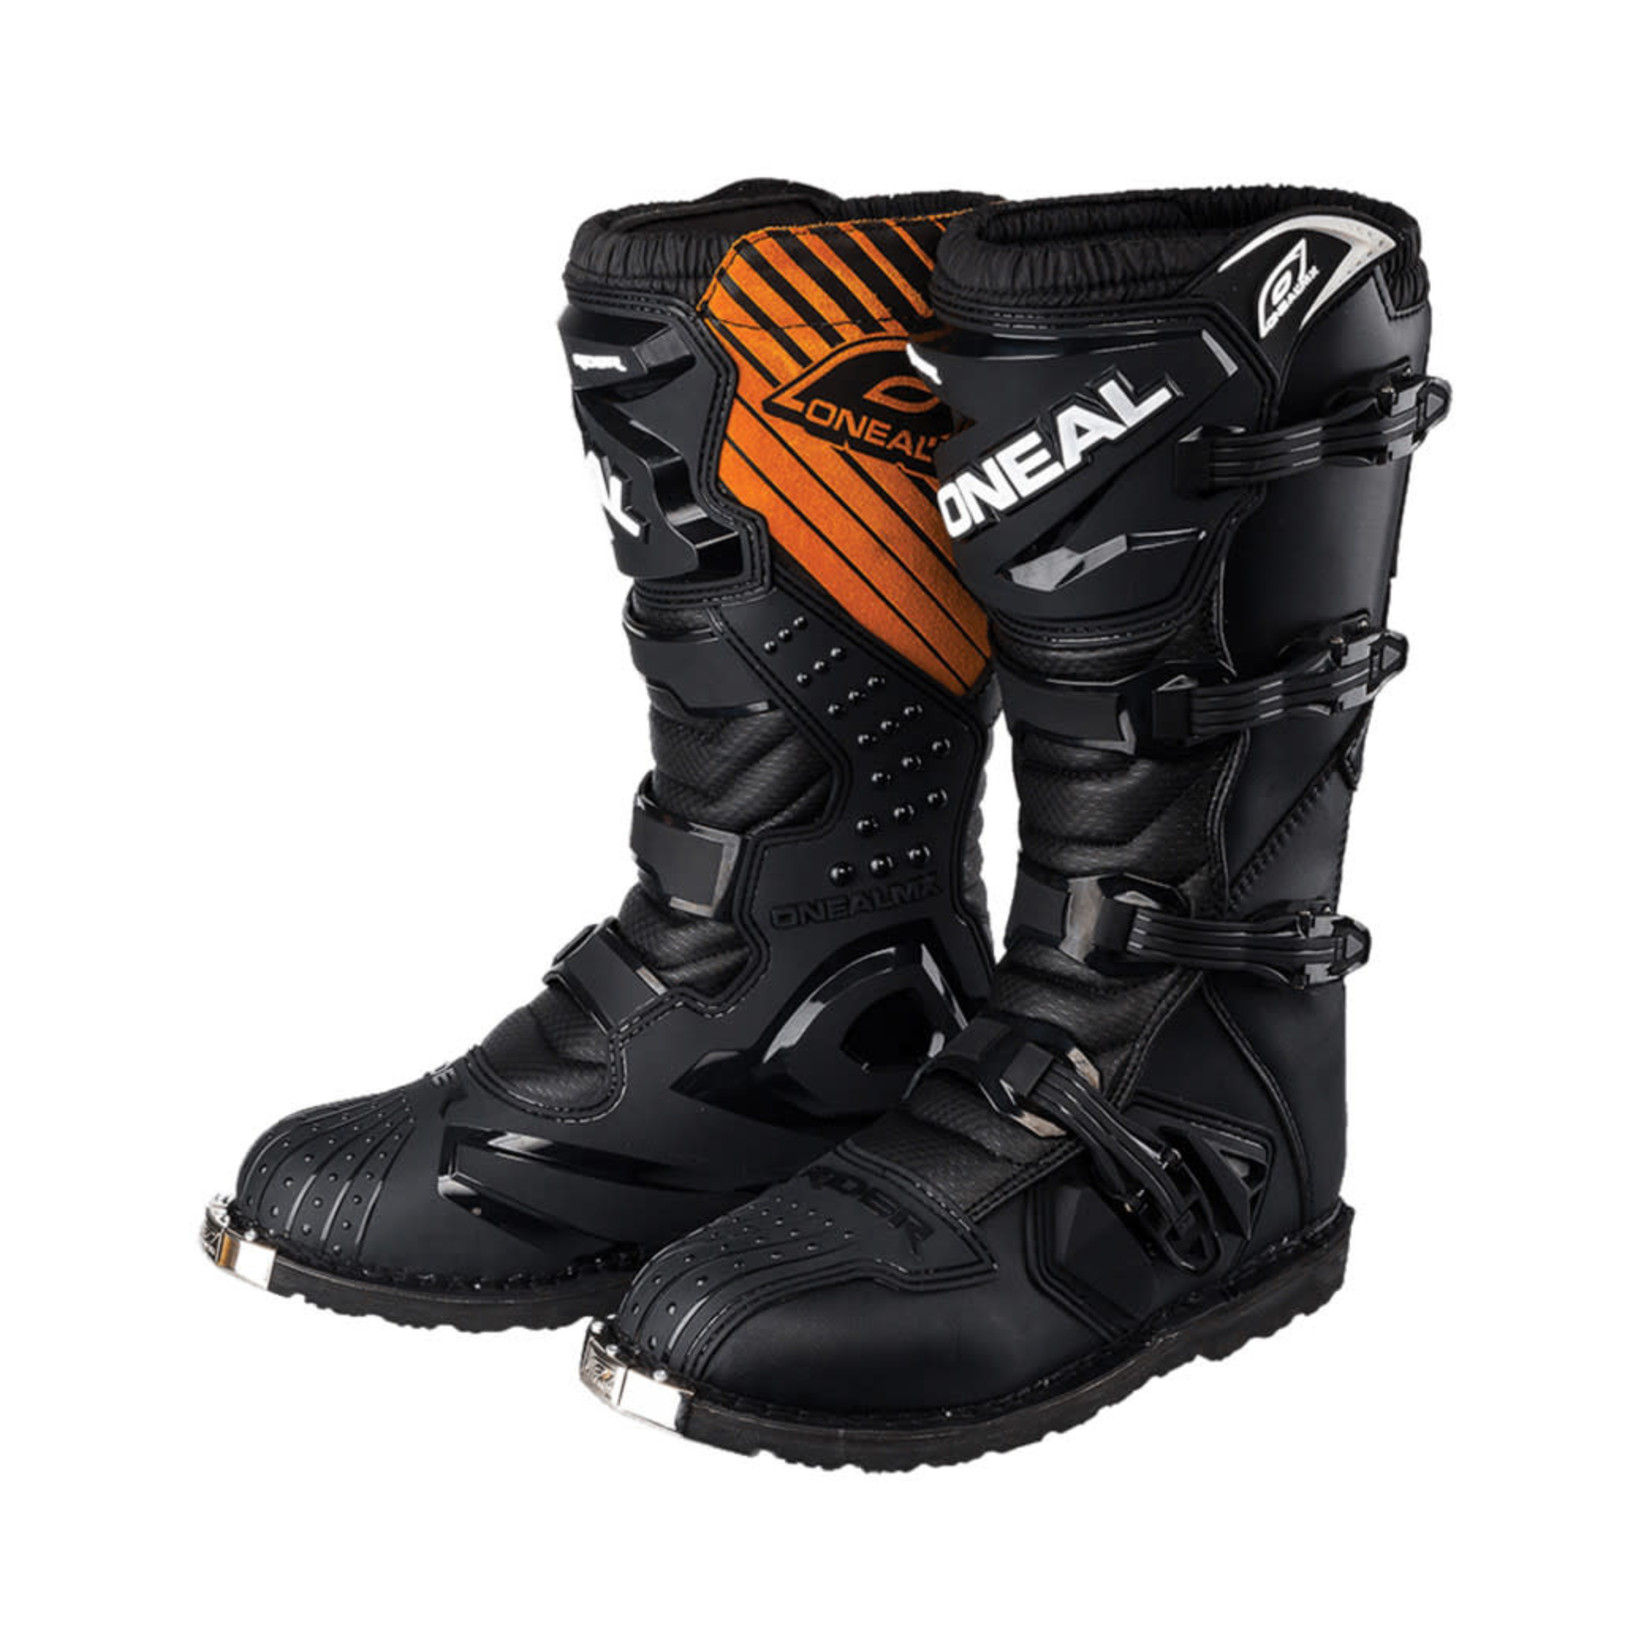 Oneal Oneal Rider boots black